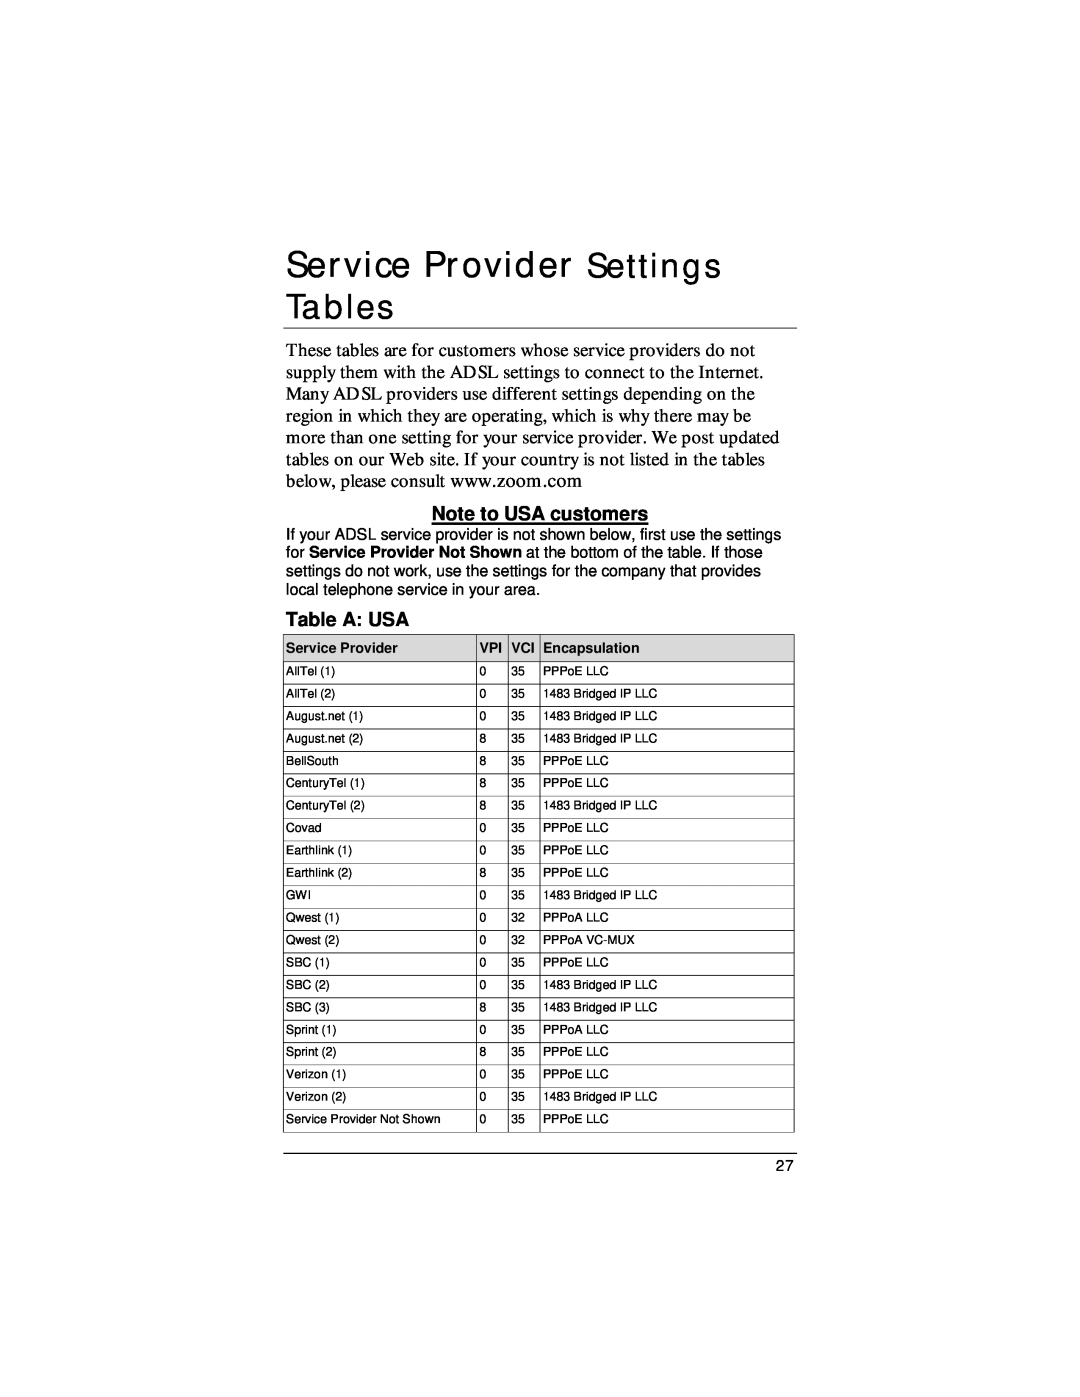 Zoom None quick start Service Provider Settings, Note to USA customers, Table A USA, Tables 